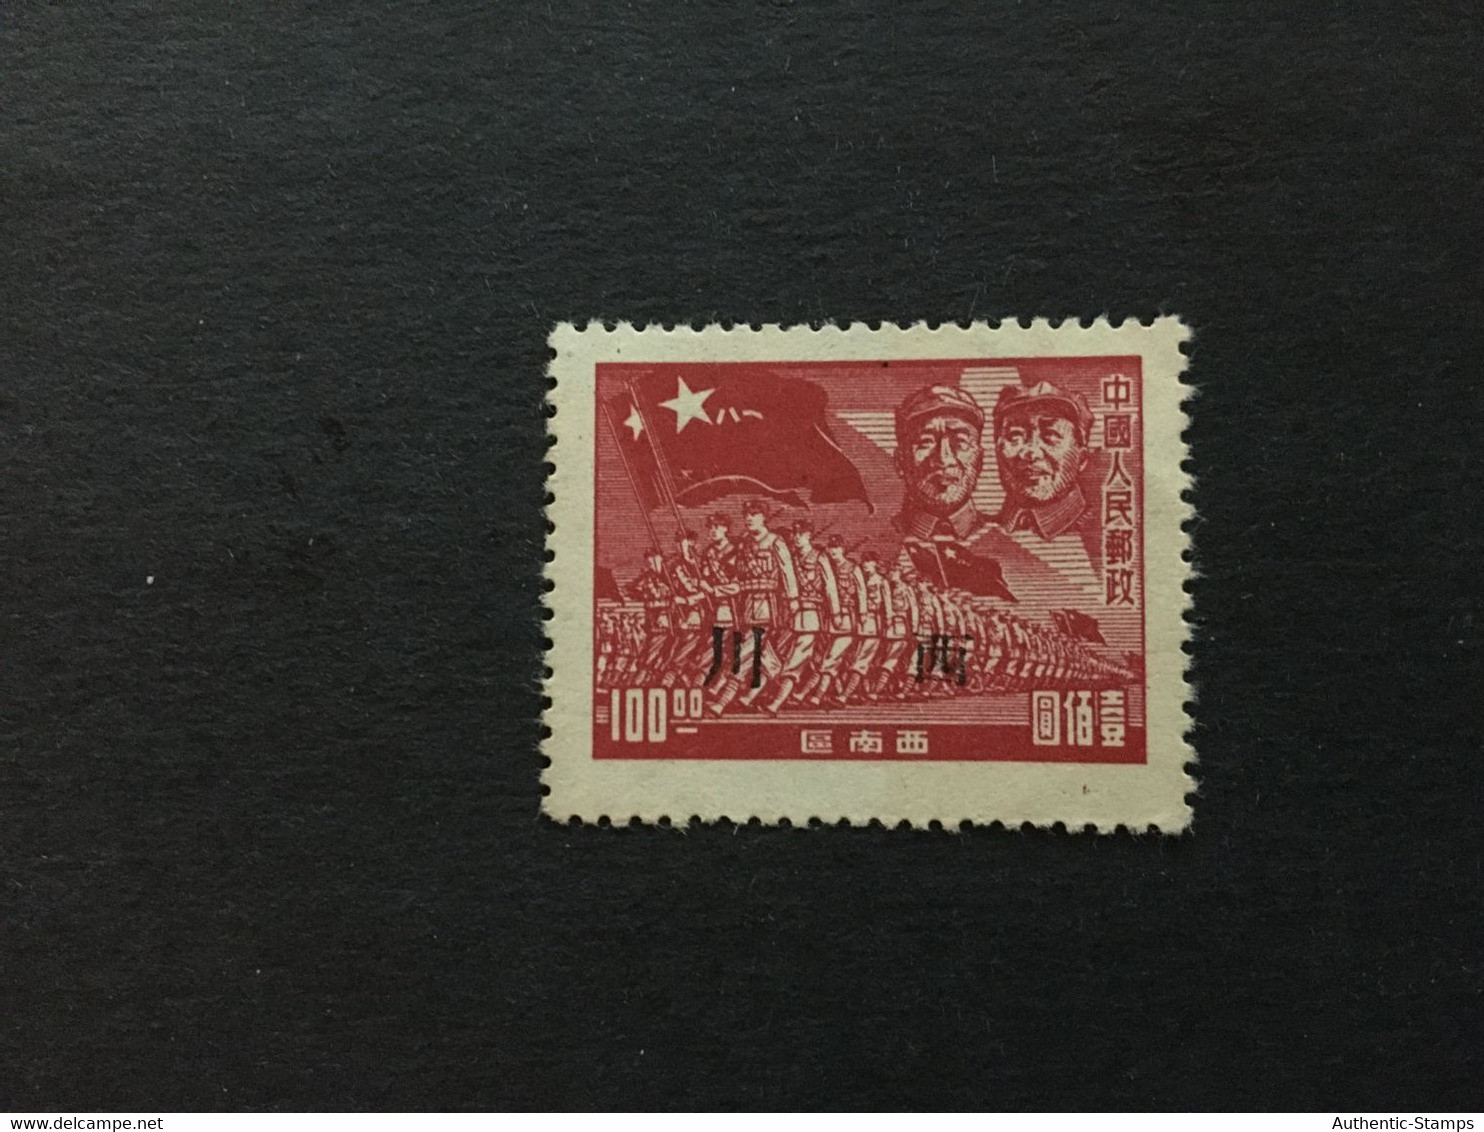 1950  CHINA  STAMP, Rare Overprint, Western Sichuan, TIMBRO, STEMPEL, UnUSED, CINA, CHINE, LIST 2957 - Chine Del Suoeste 1949-50